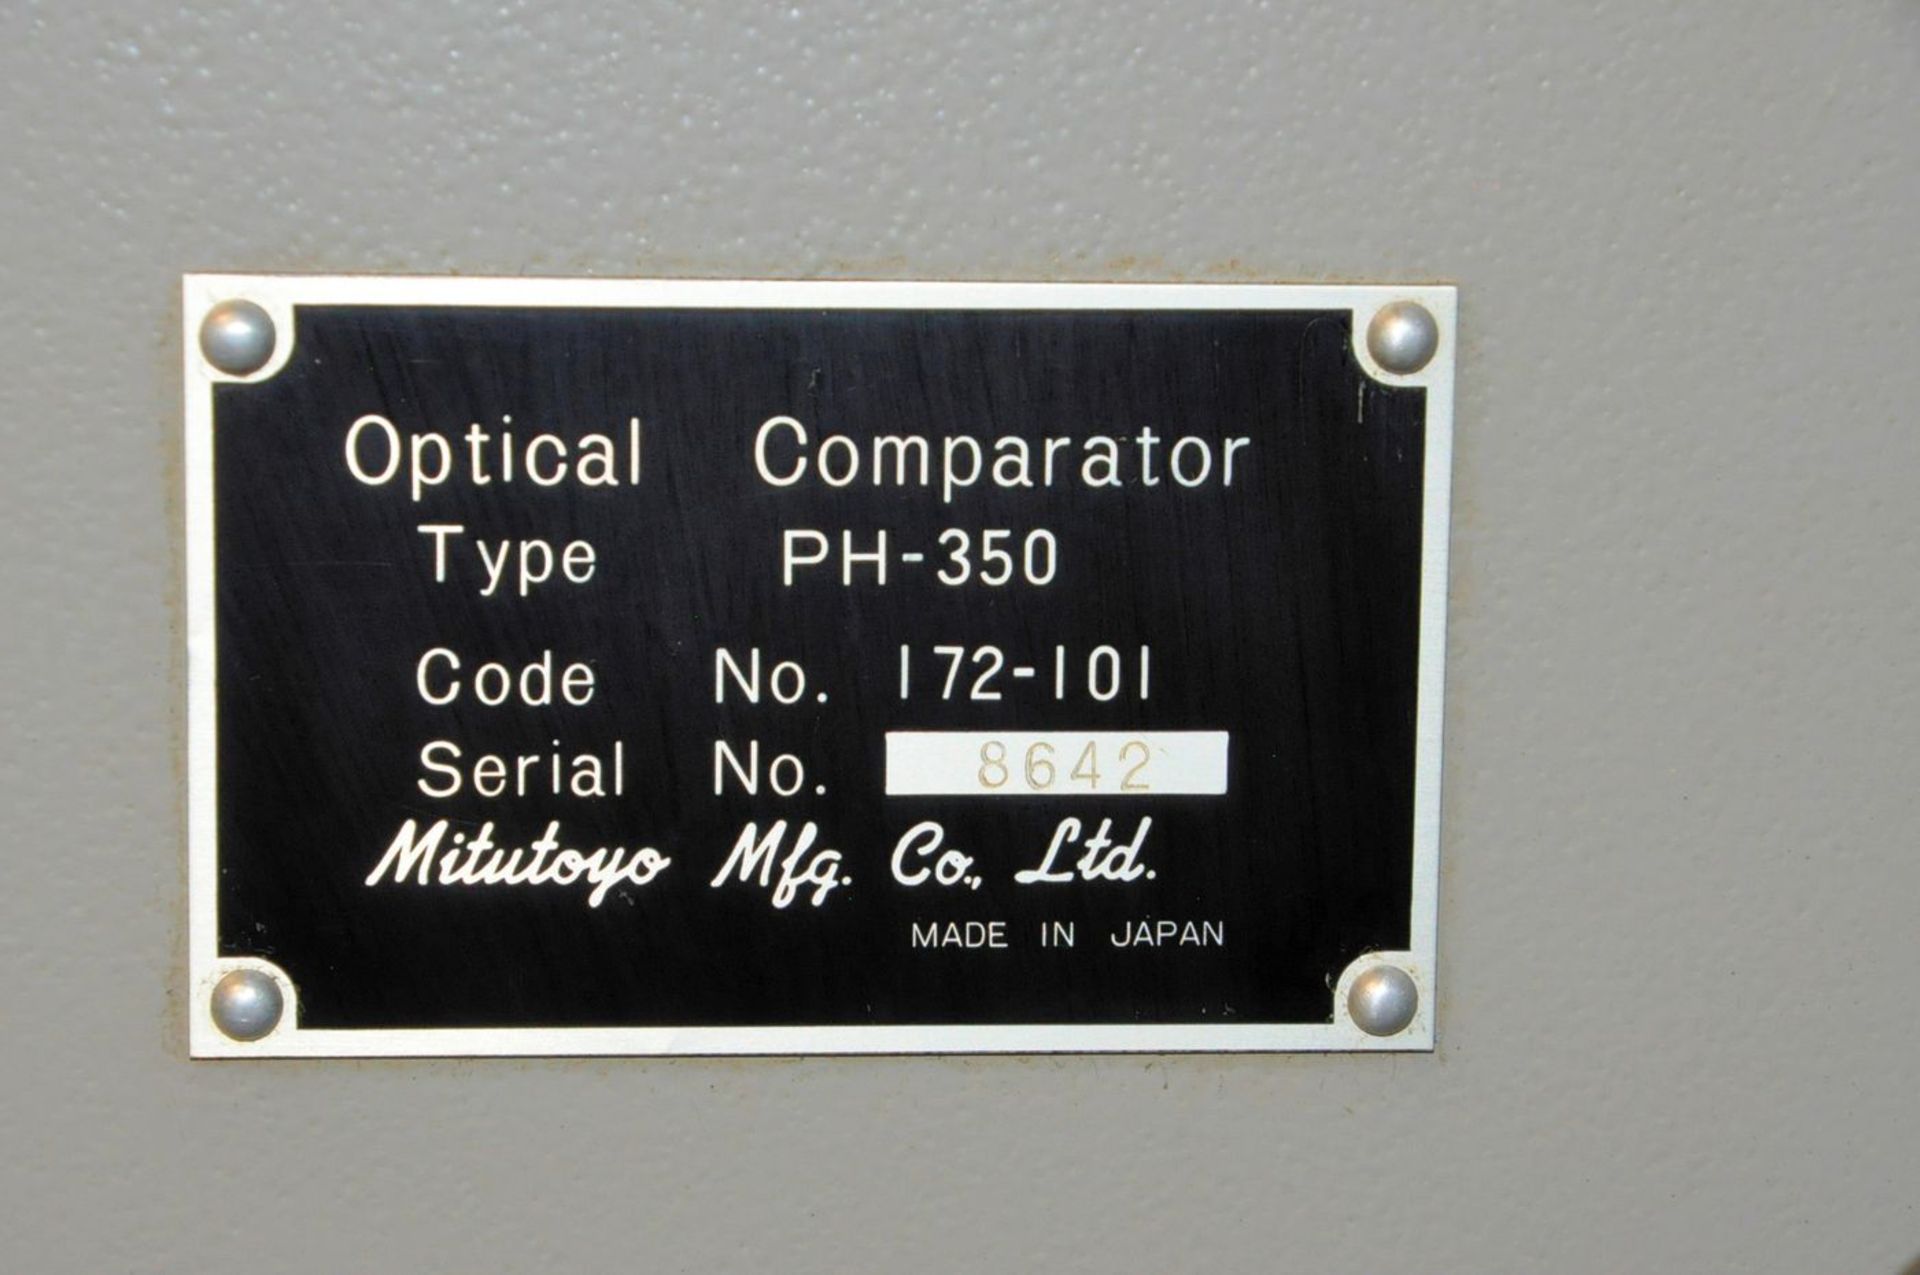 Mitutoyo PH-350 14" Optical Comparator, S/N 8642, Code #172-101 on Steel Base - Image 5 of 5